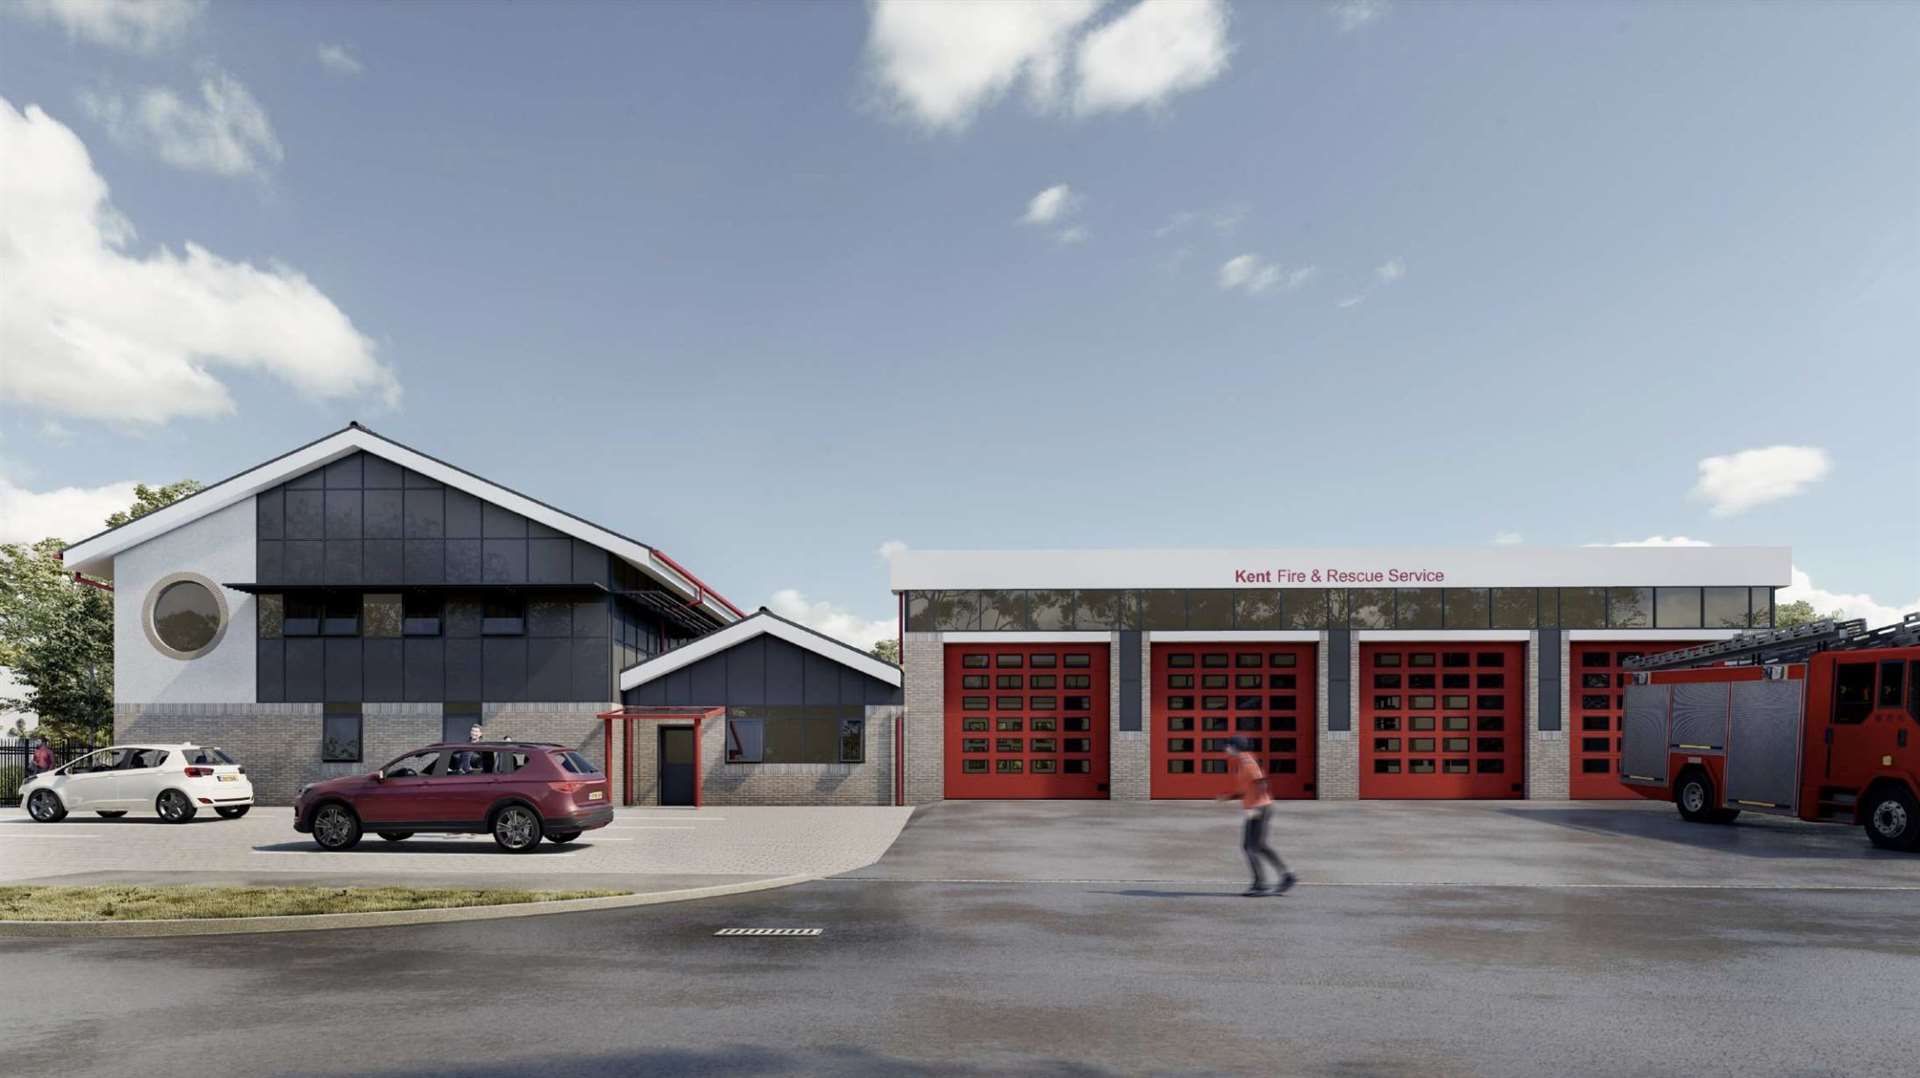 The existing facility will be upgraded as part of the plan. Picture: Bond Bryan/KFRS